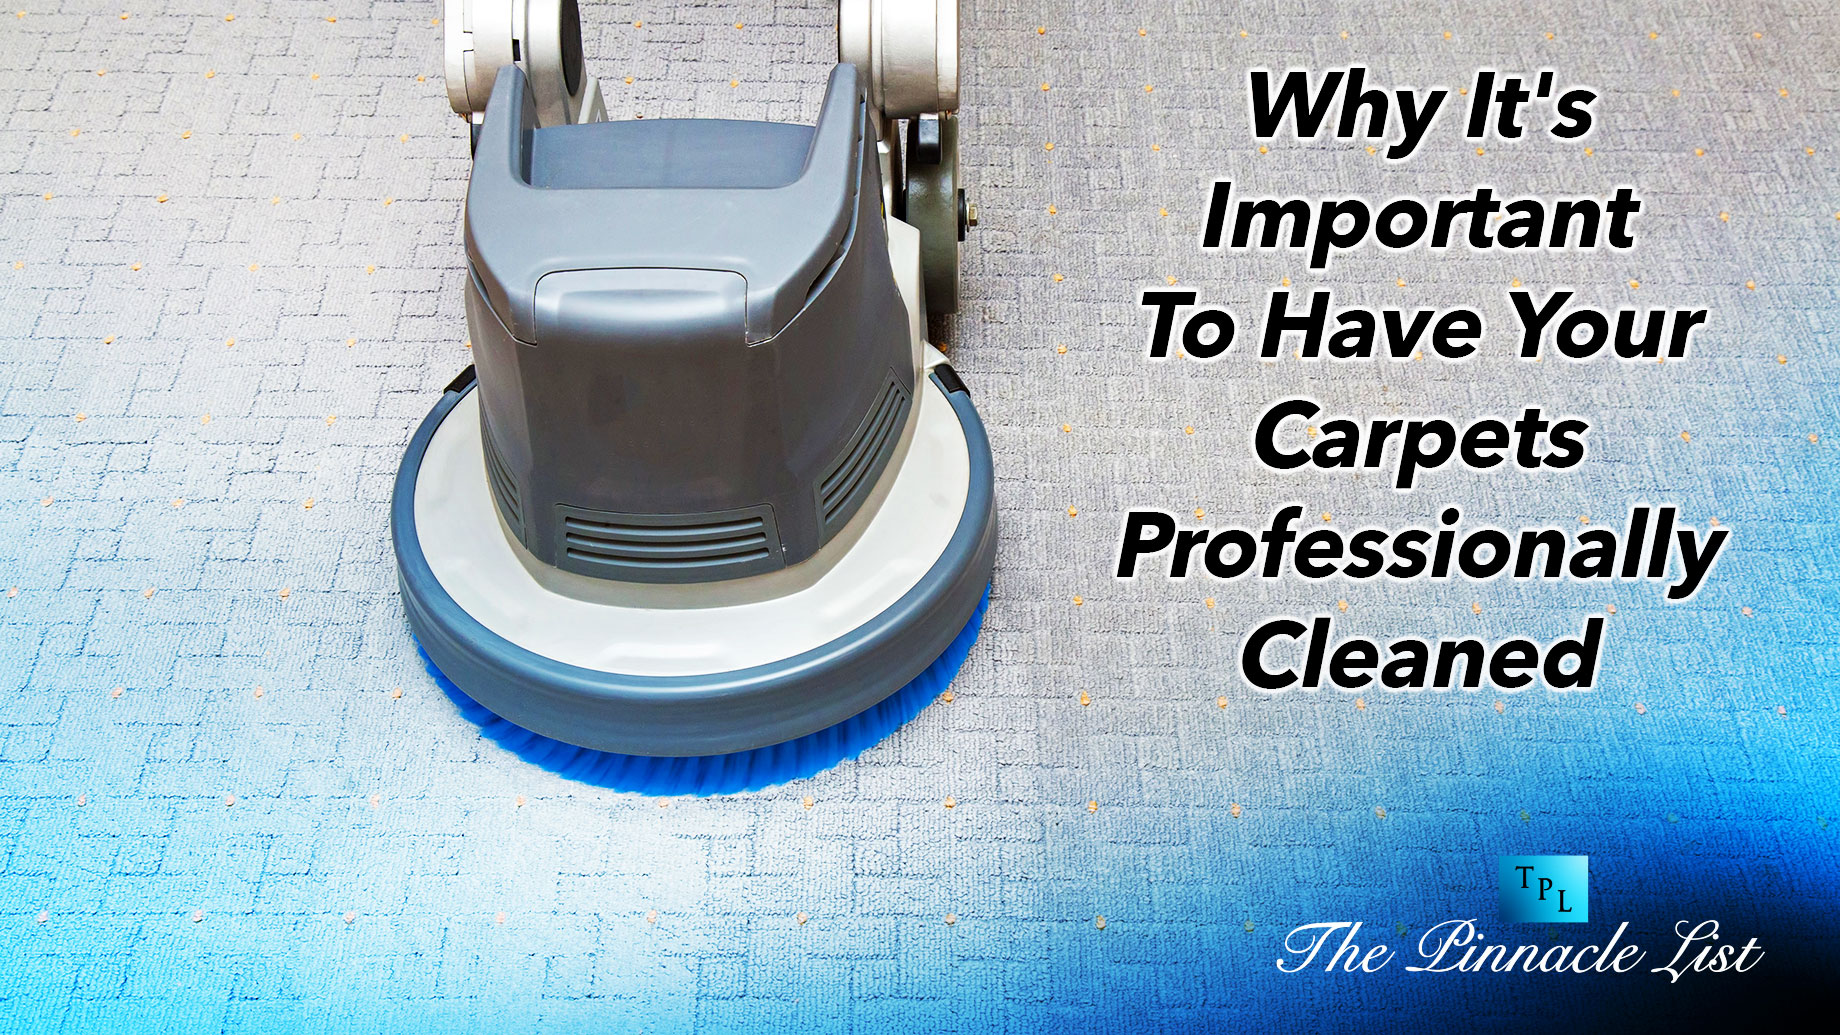 Why It's Important To Have Your Carpets Professionally Cleaned